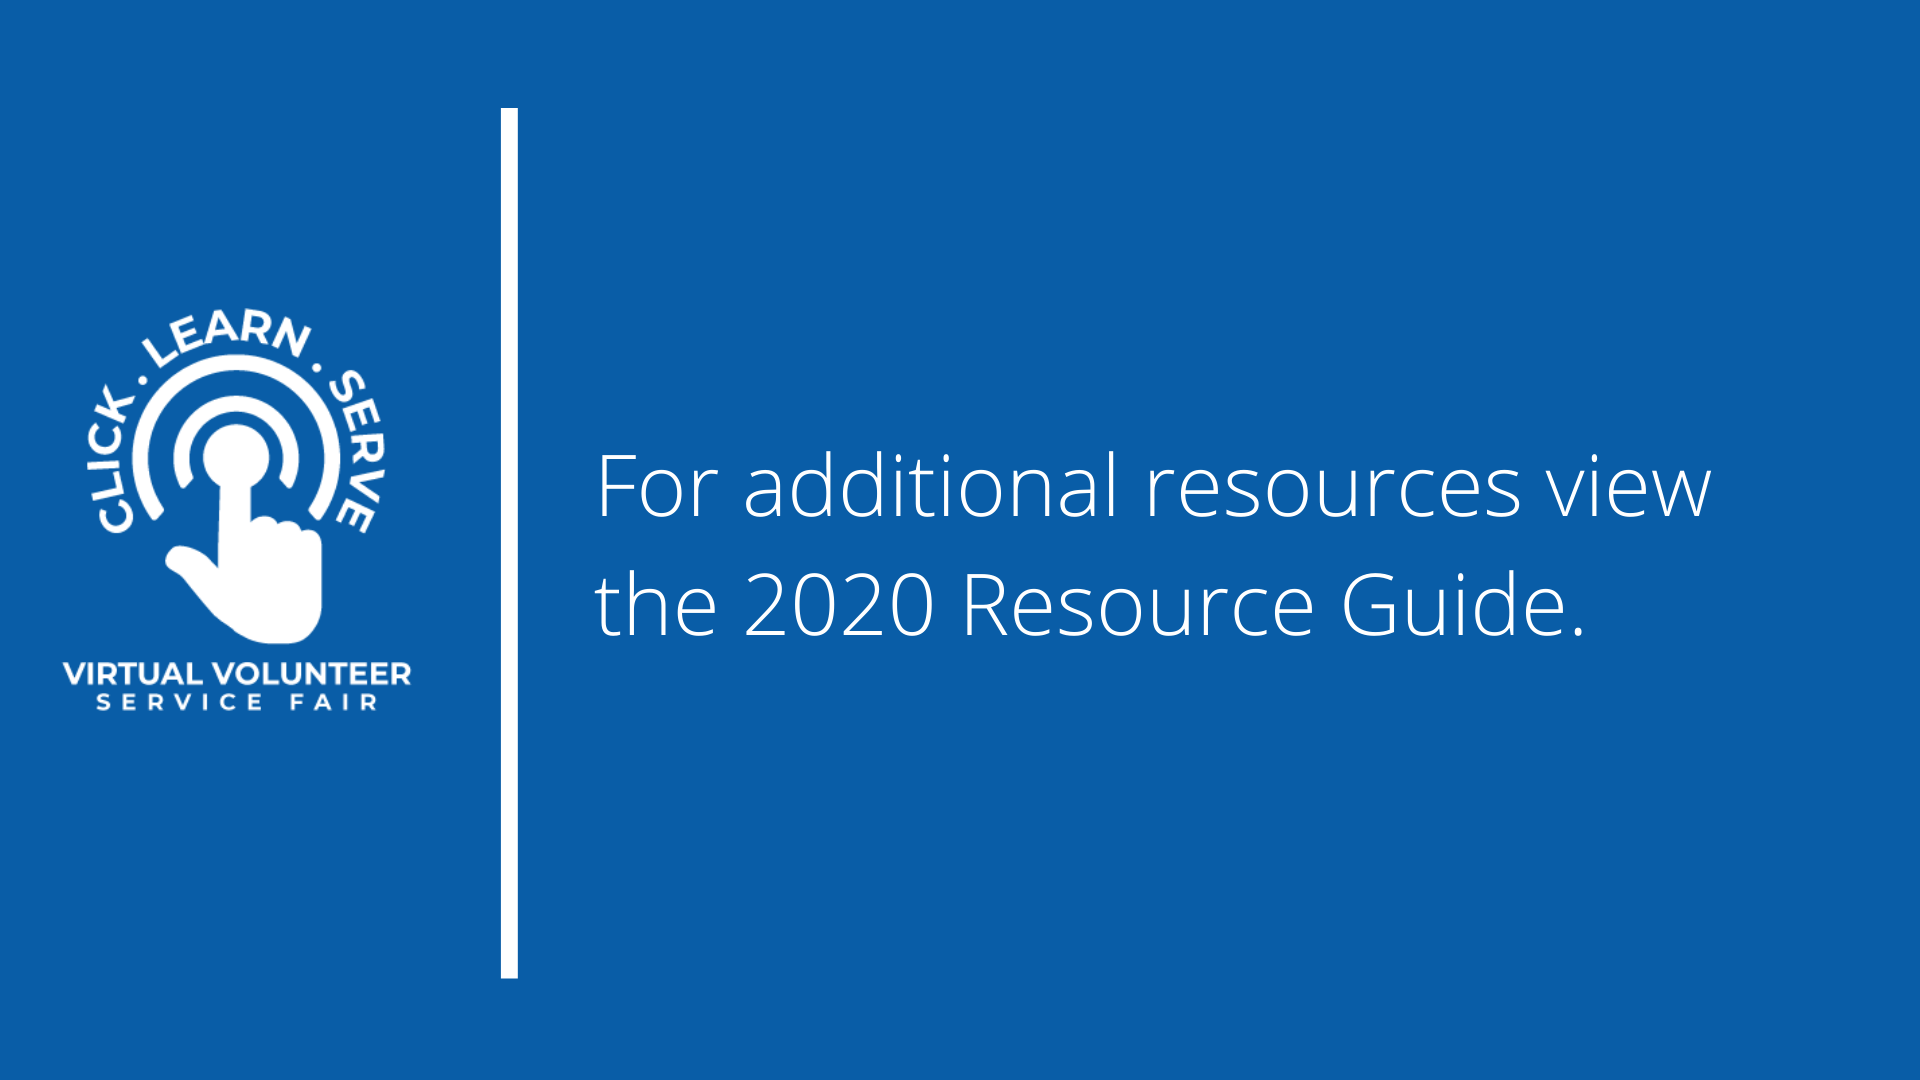 For additional resources view the 2020 Resource Guide.